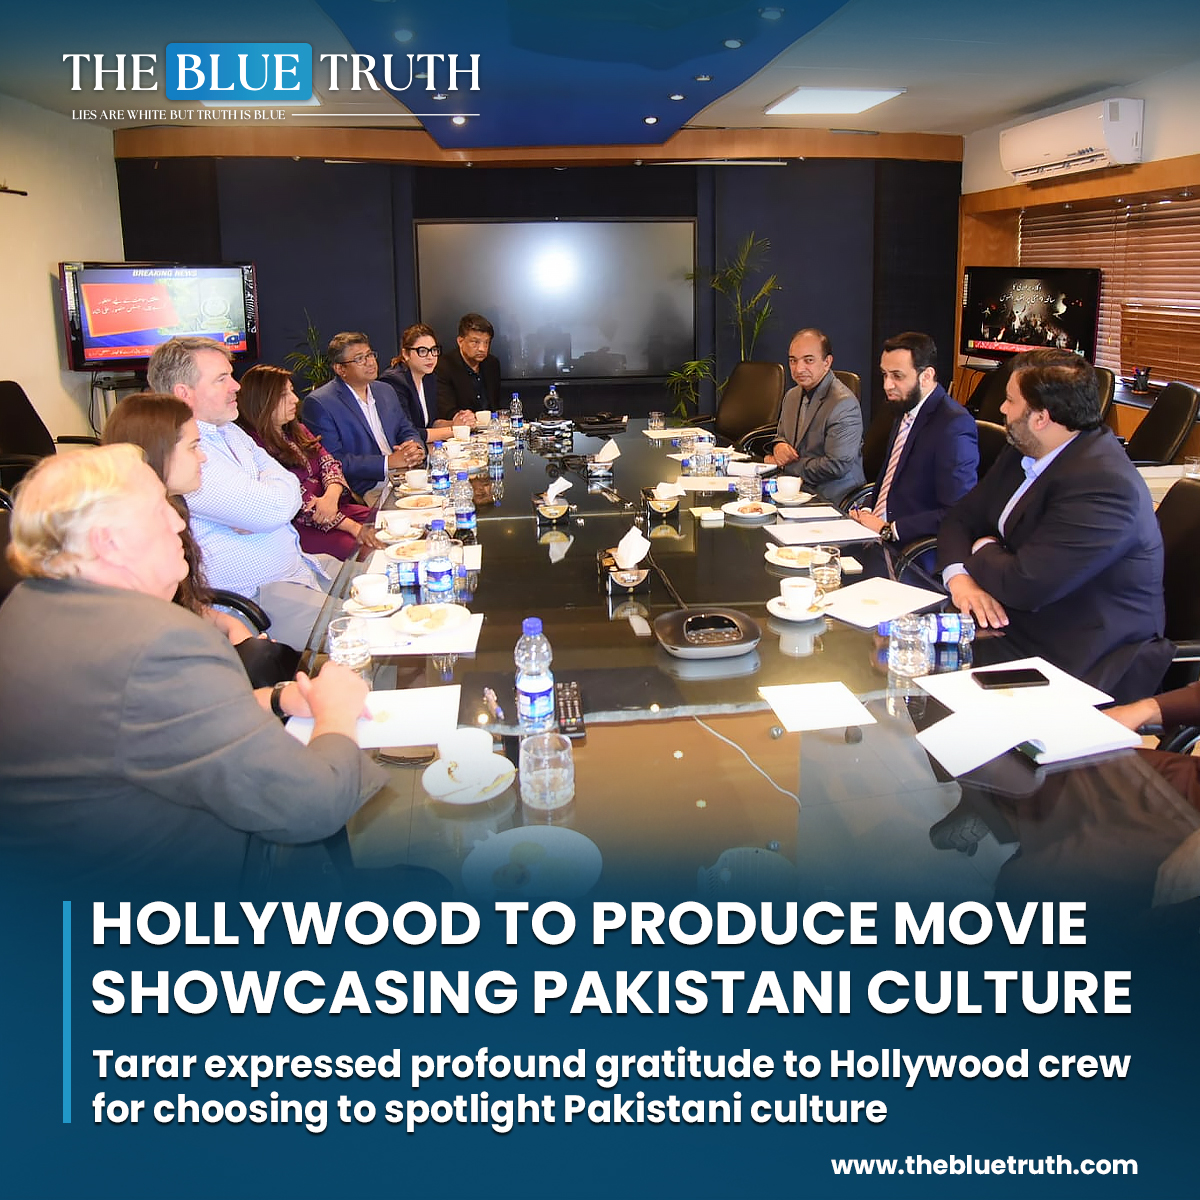 With the movie's premiere, the hope is to dispel misconceptions and portray Pakistan in a new light, shifting away from perceptions of radicalism.
#PakistanFilmIndustry #HollywoodProduction #tbt #TheBlueTruth